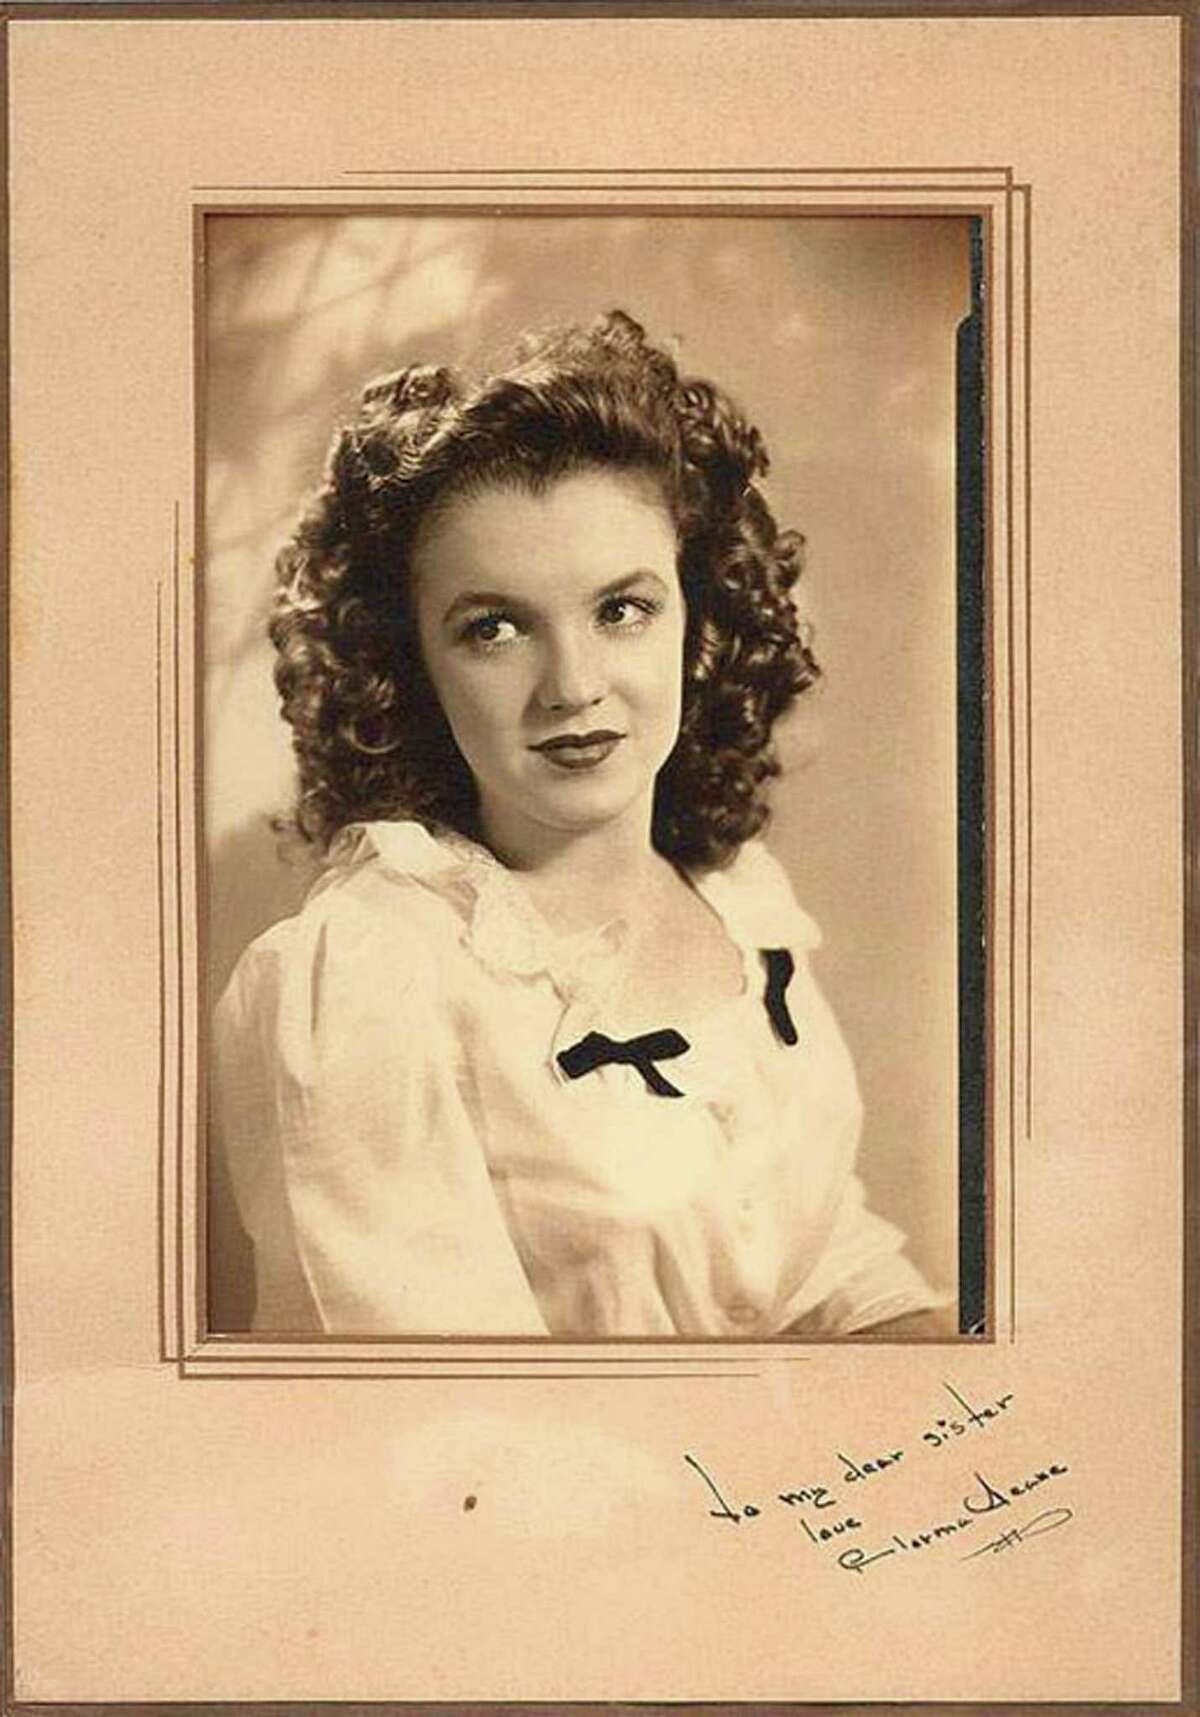 The vintage portrait of Norma Jean Dougherty, also known as actress Marilyn Monroe, with a rare autograph and dedication "To my dear sister," is on display in this undated photo for Sotheby's 2001 online auction of articles from the collection of Monroe's half-sister, Bernice Miracle.